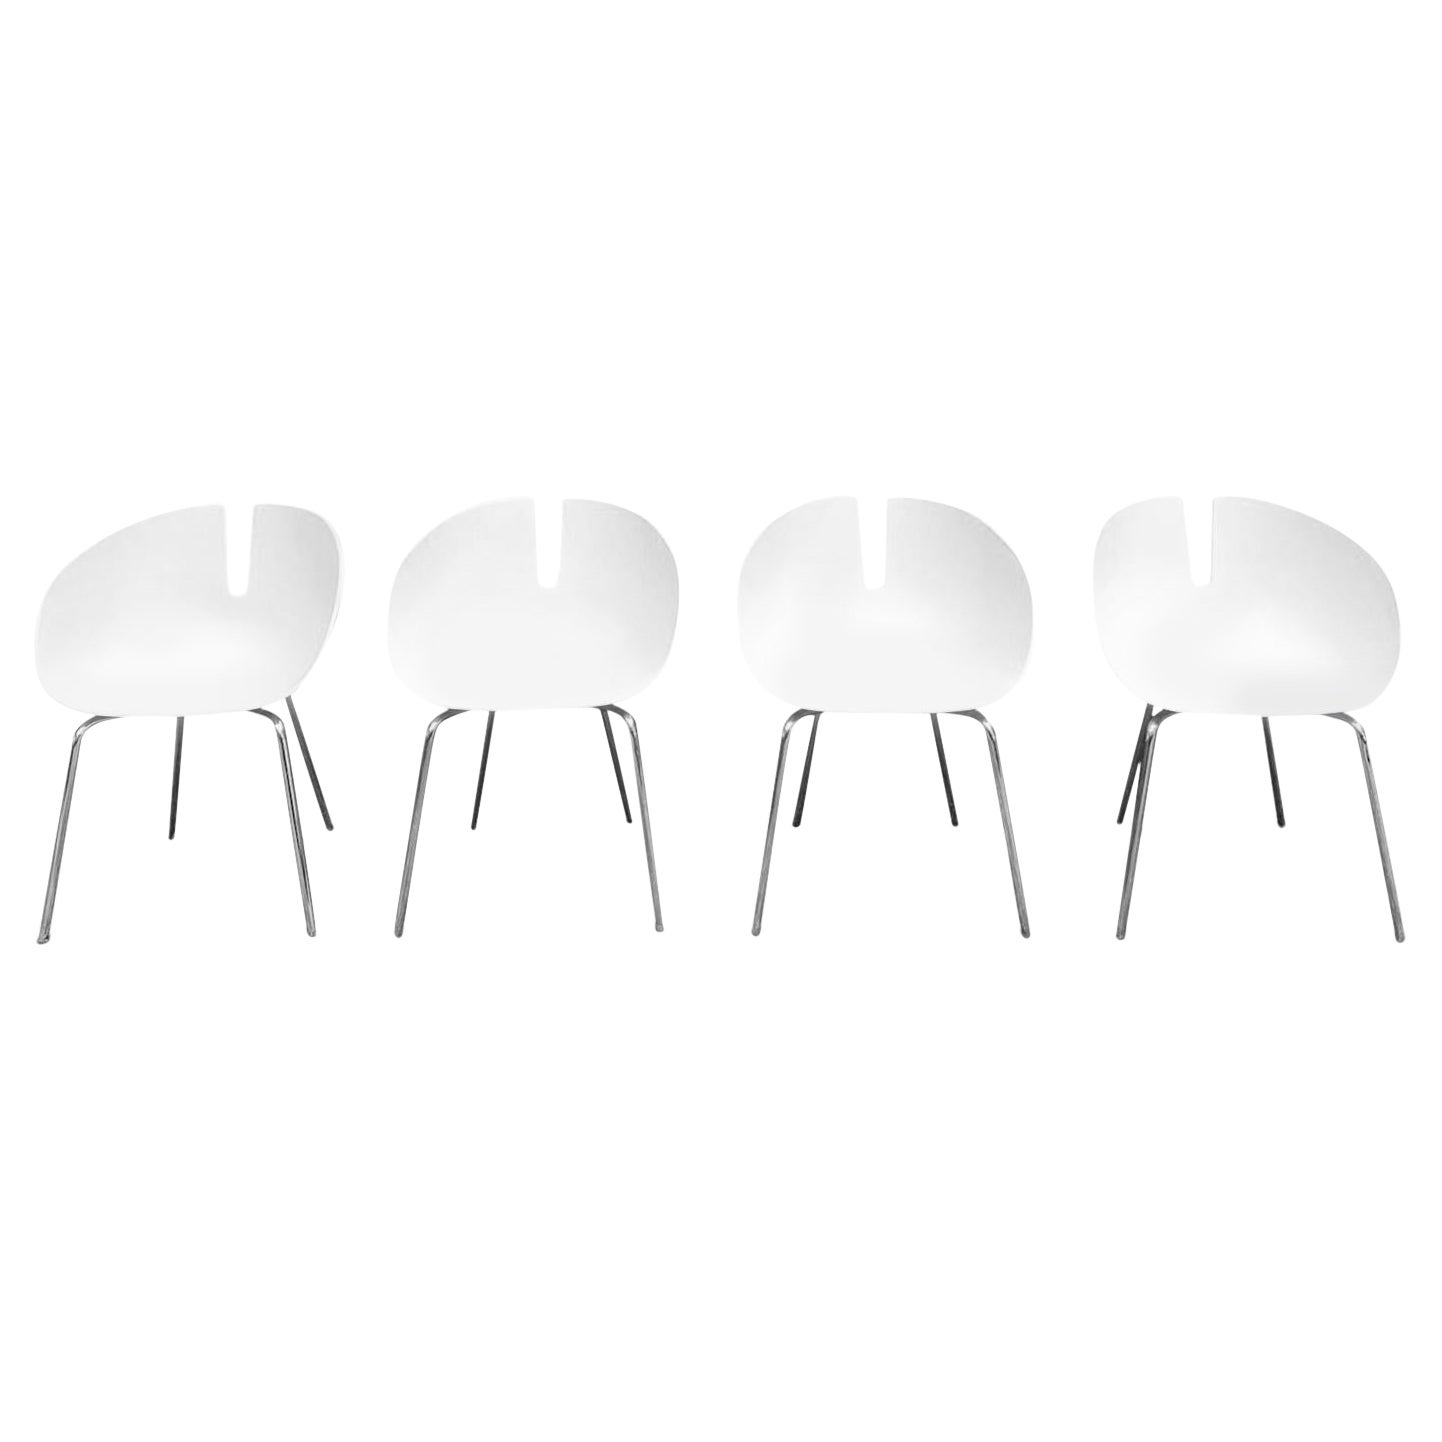 Set of Four White Moroso Chairs, Model Fjord, by Patricia Urquiola 2002